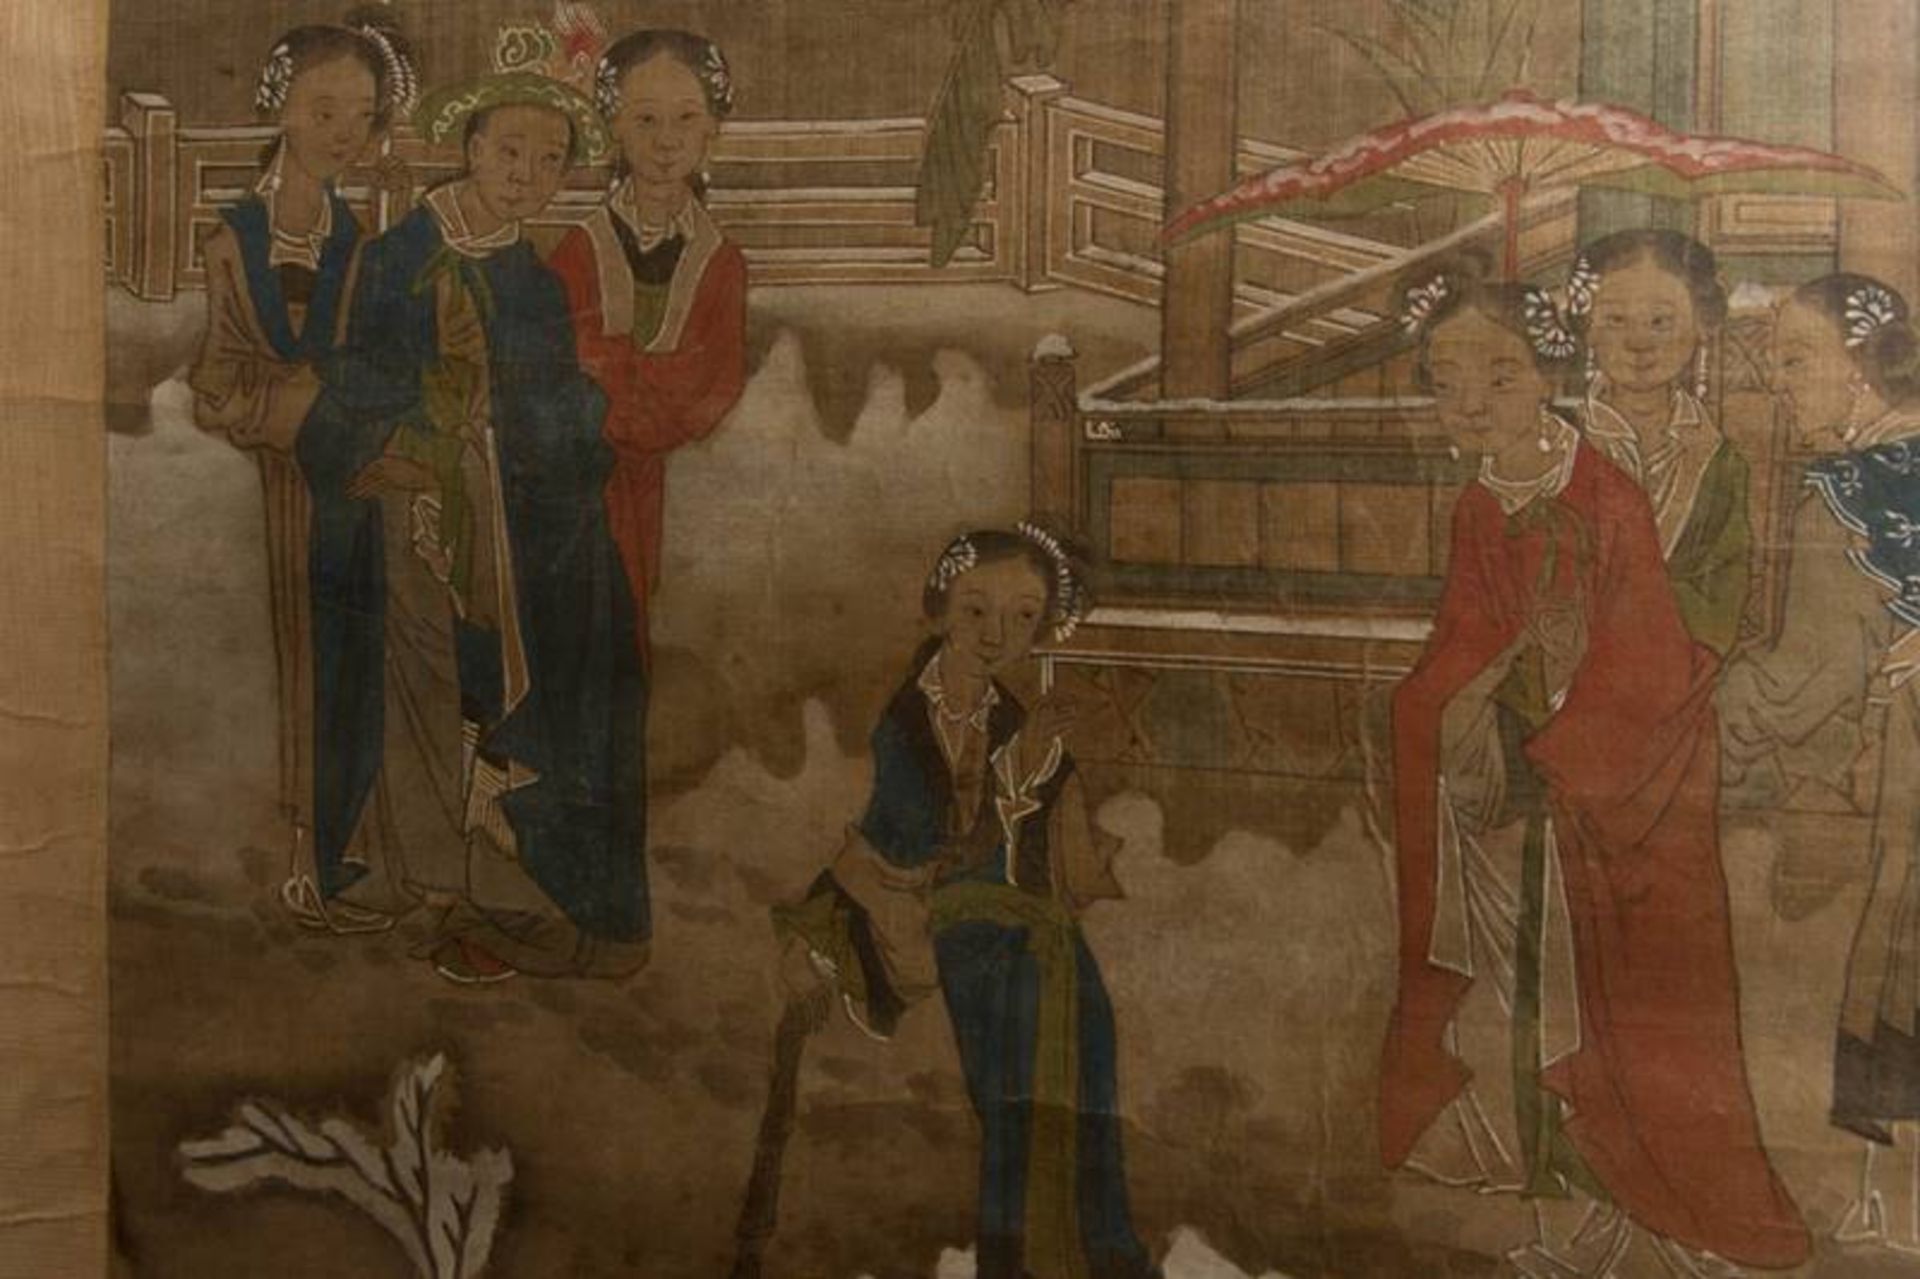 Japanese scroll painting - Image 4 of 8